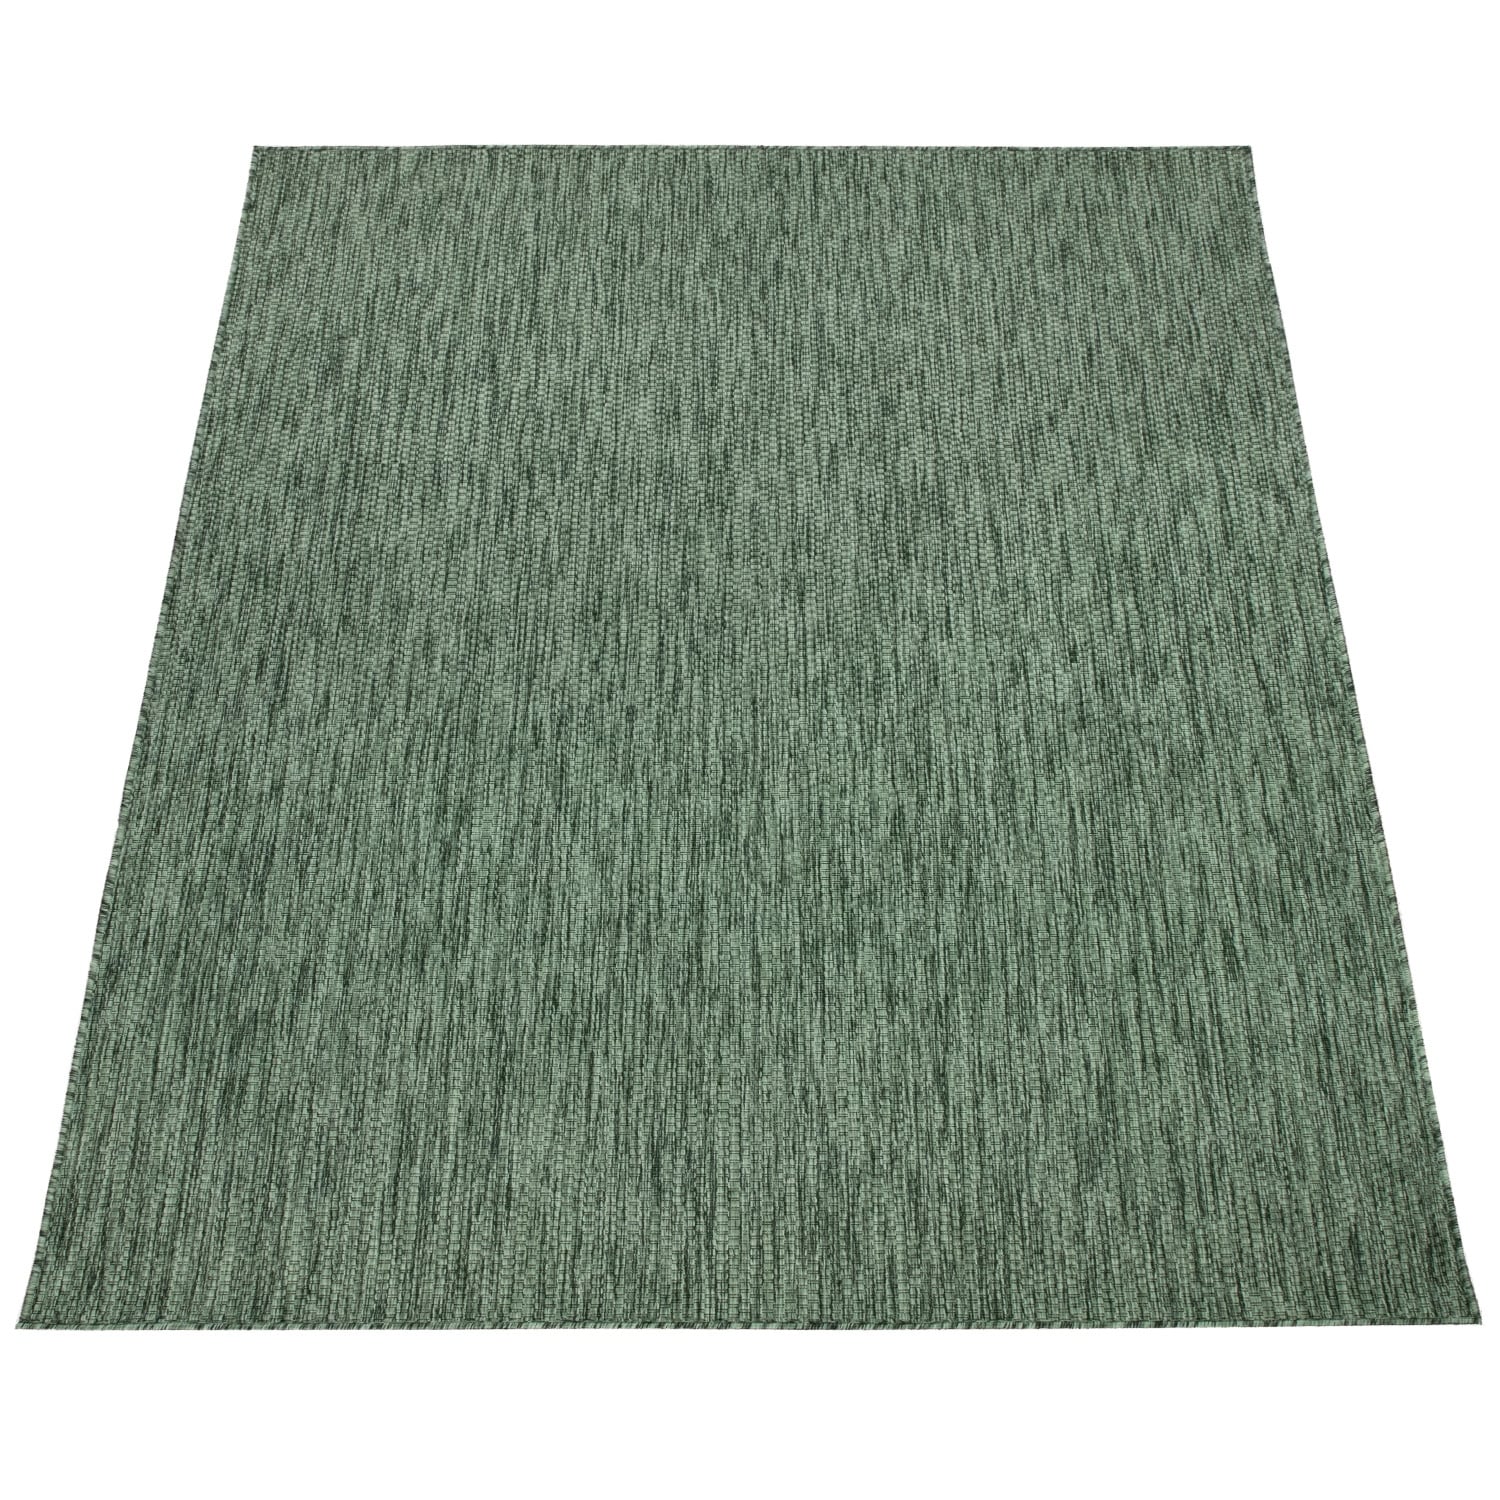 https://ak1.ostkcdn.com/images/products/is/images/direct/db1231a582cc323f250f7eecf5e762499f77f3b9/Plain-Outdoor-Rug-Weatherproof-for-Patio-in-different-solid-colors.jpg